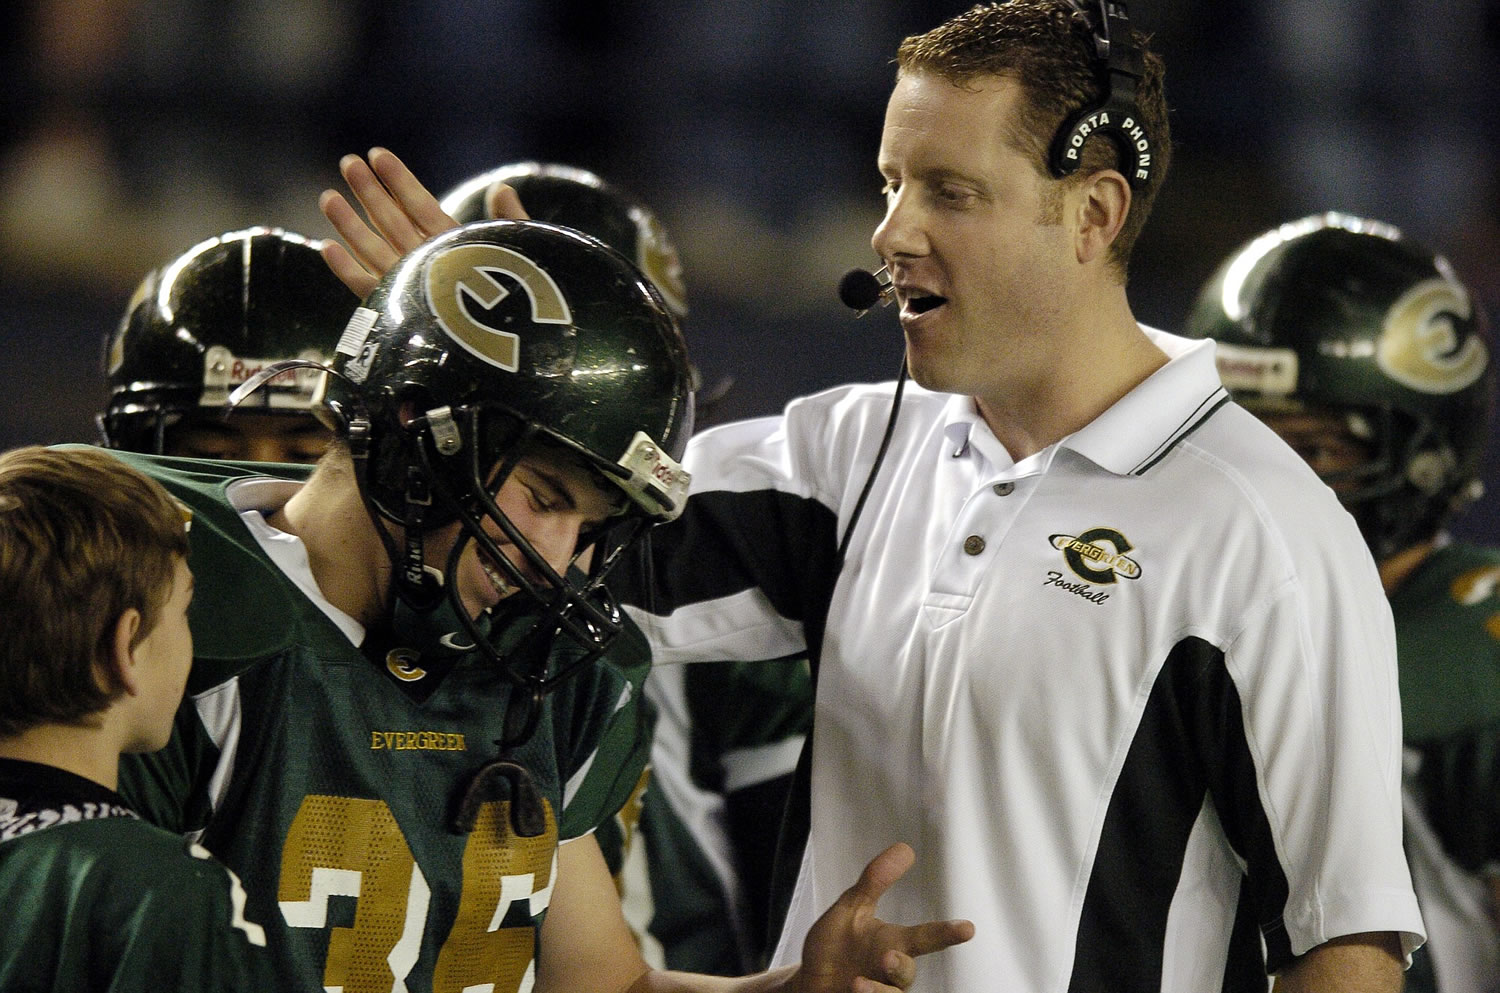 Evergreen High School football coach Cale Piland congratulates Kane Rable during introductions before the start of the 4A state football championship game in 2004.